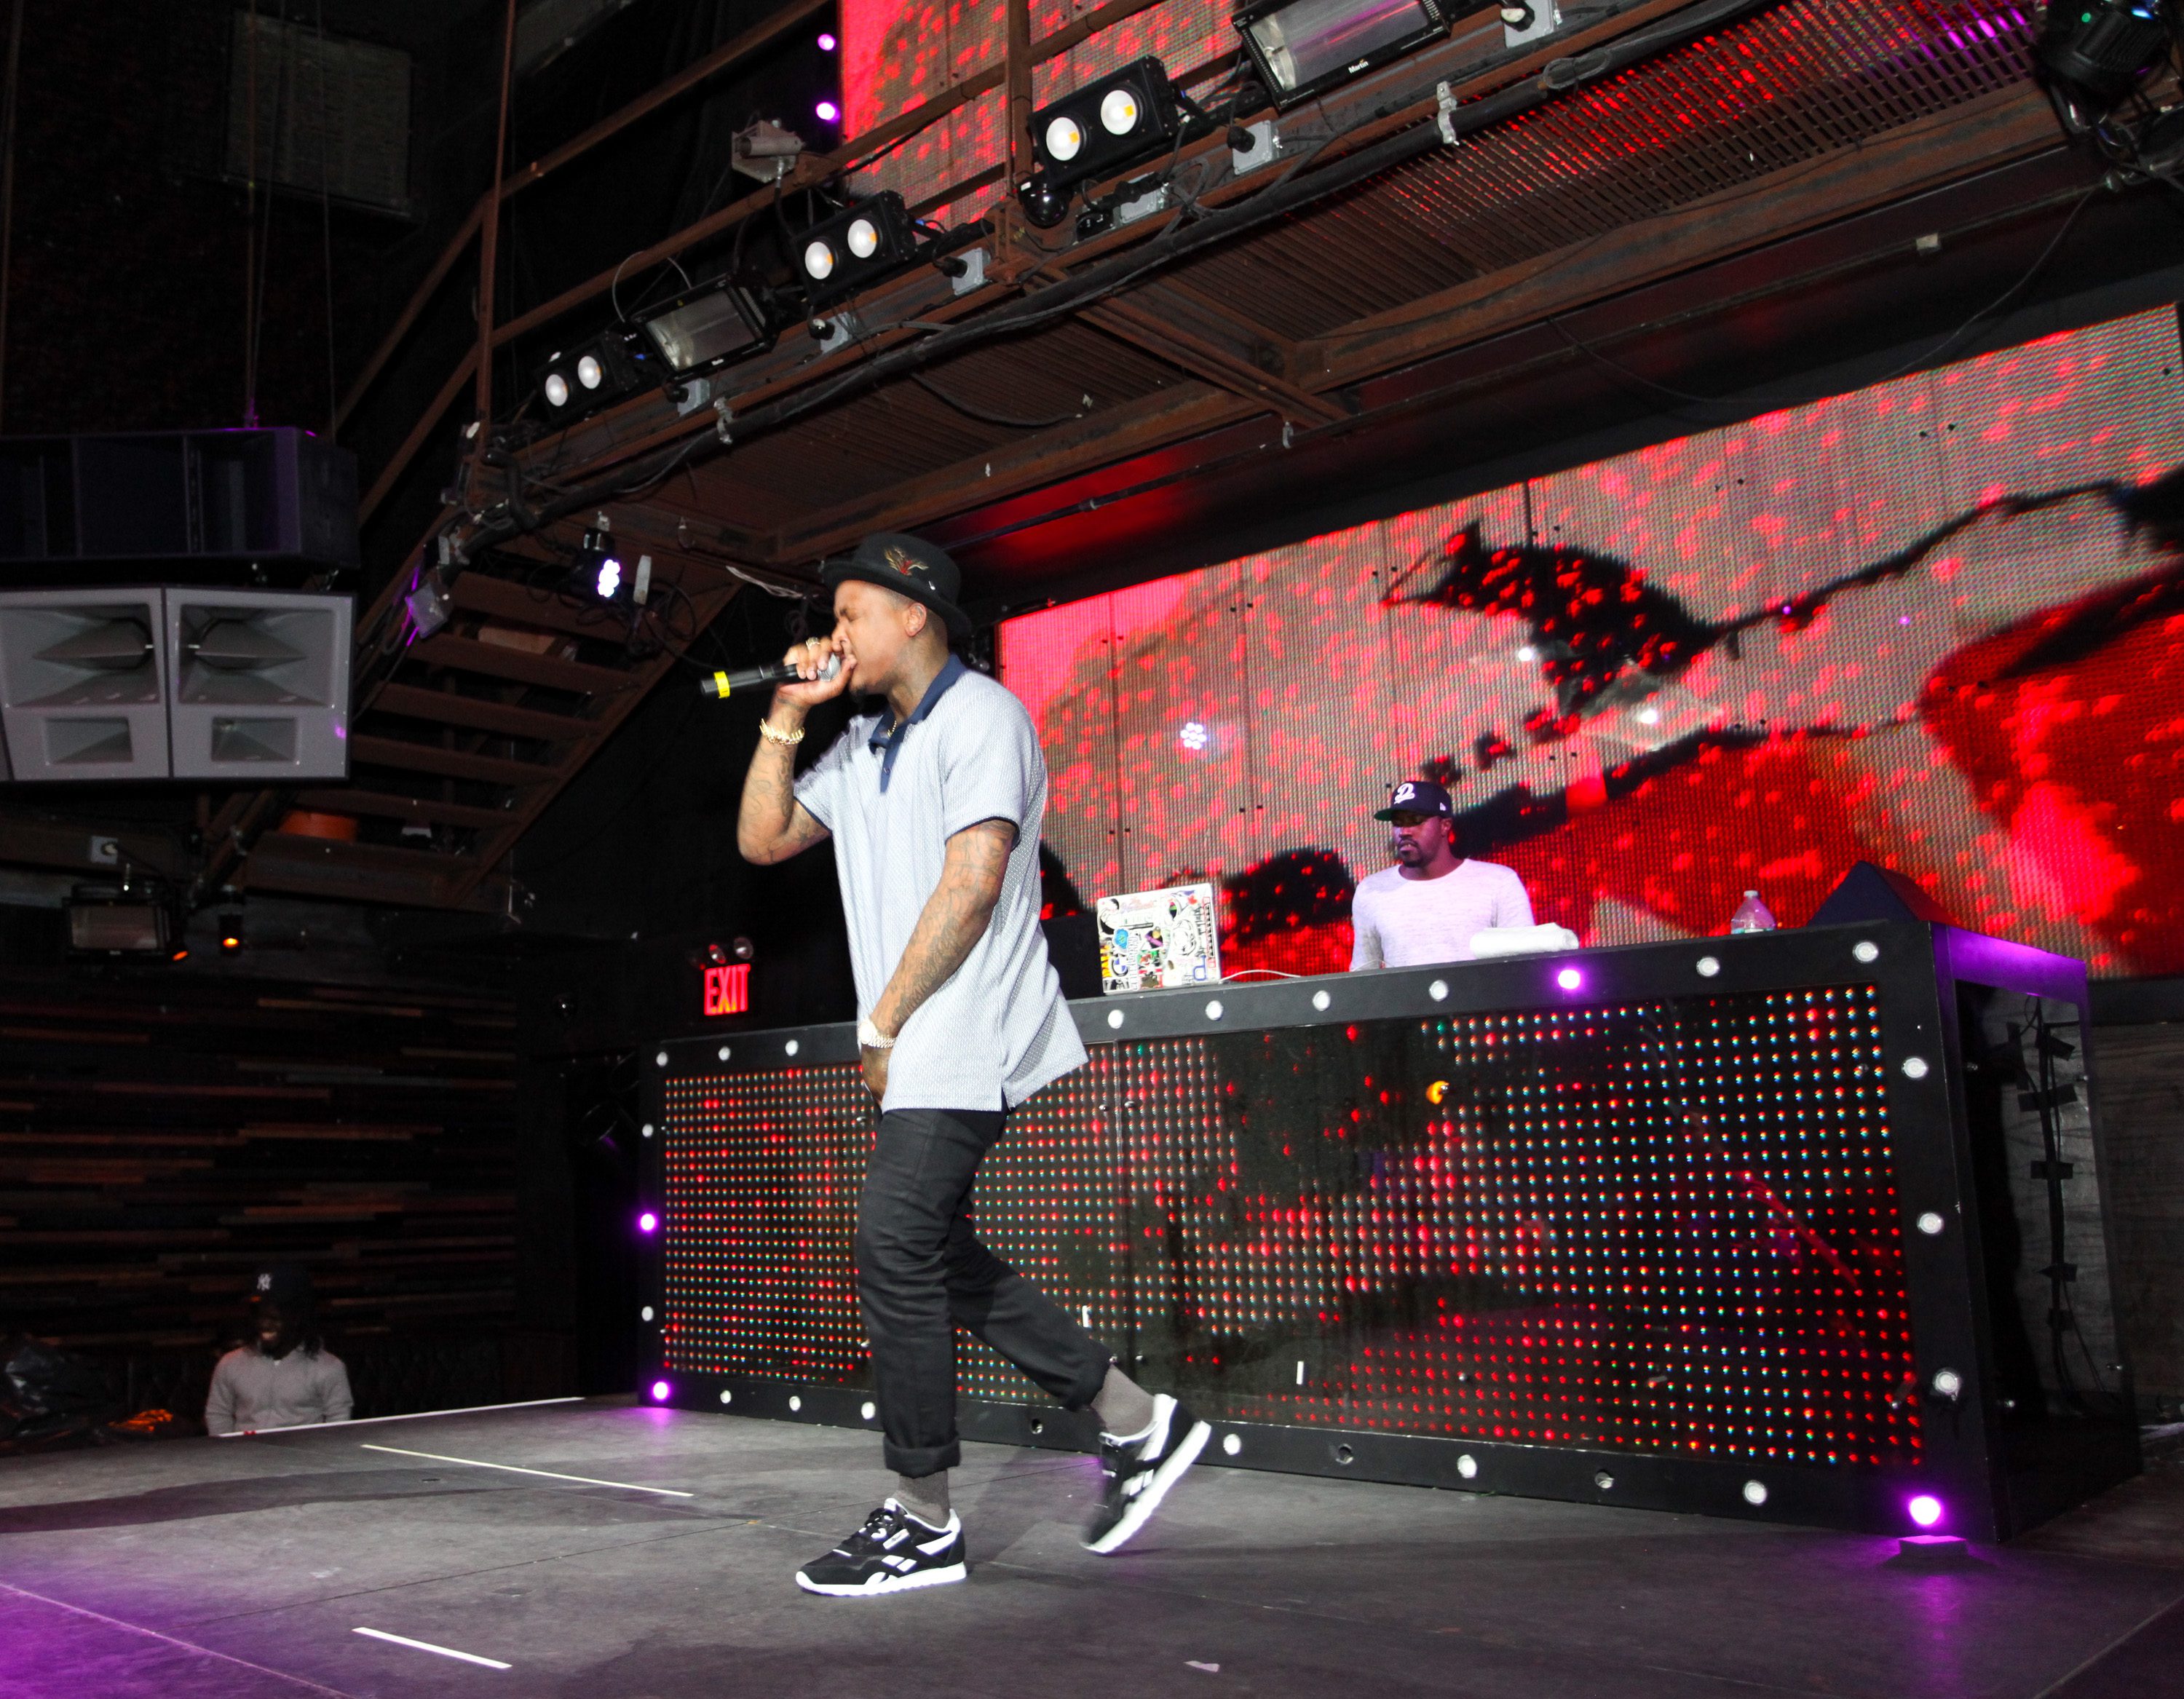 NEW YORK, NY - SEPTEMBER 16: YG performs during Reebok #girlswithgrit showcase at Marquee on September 16, 2015 in New York City. (Photo by Donald Bowers/Getty Images for Reebok)